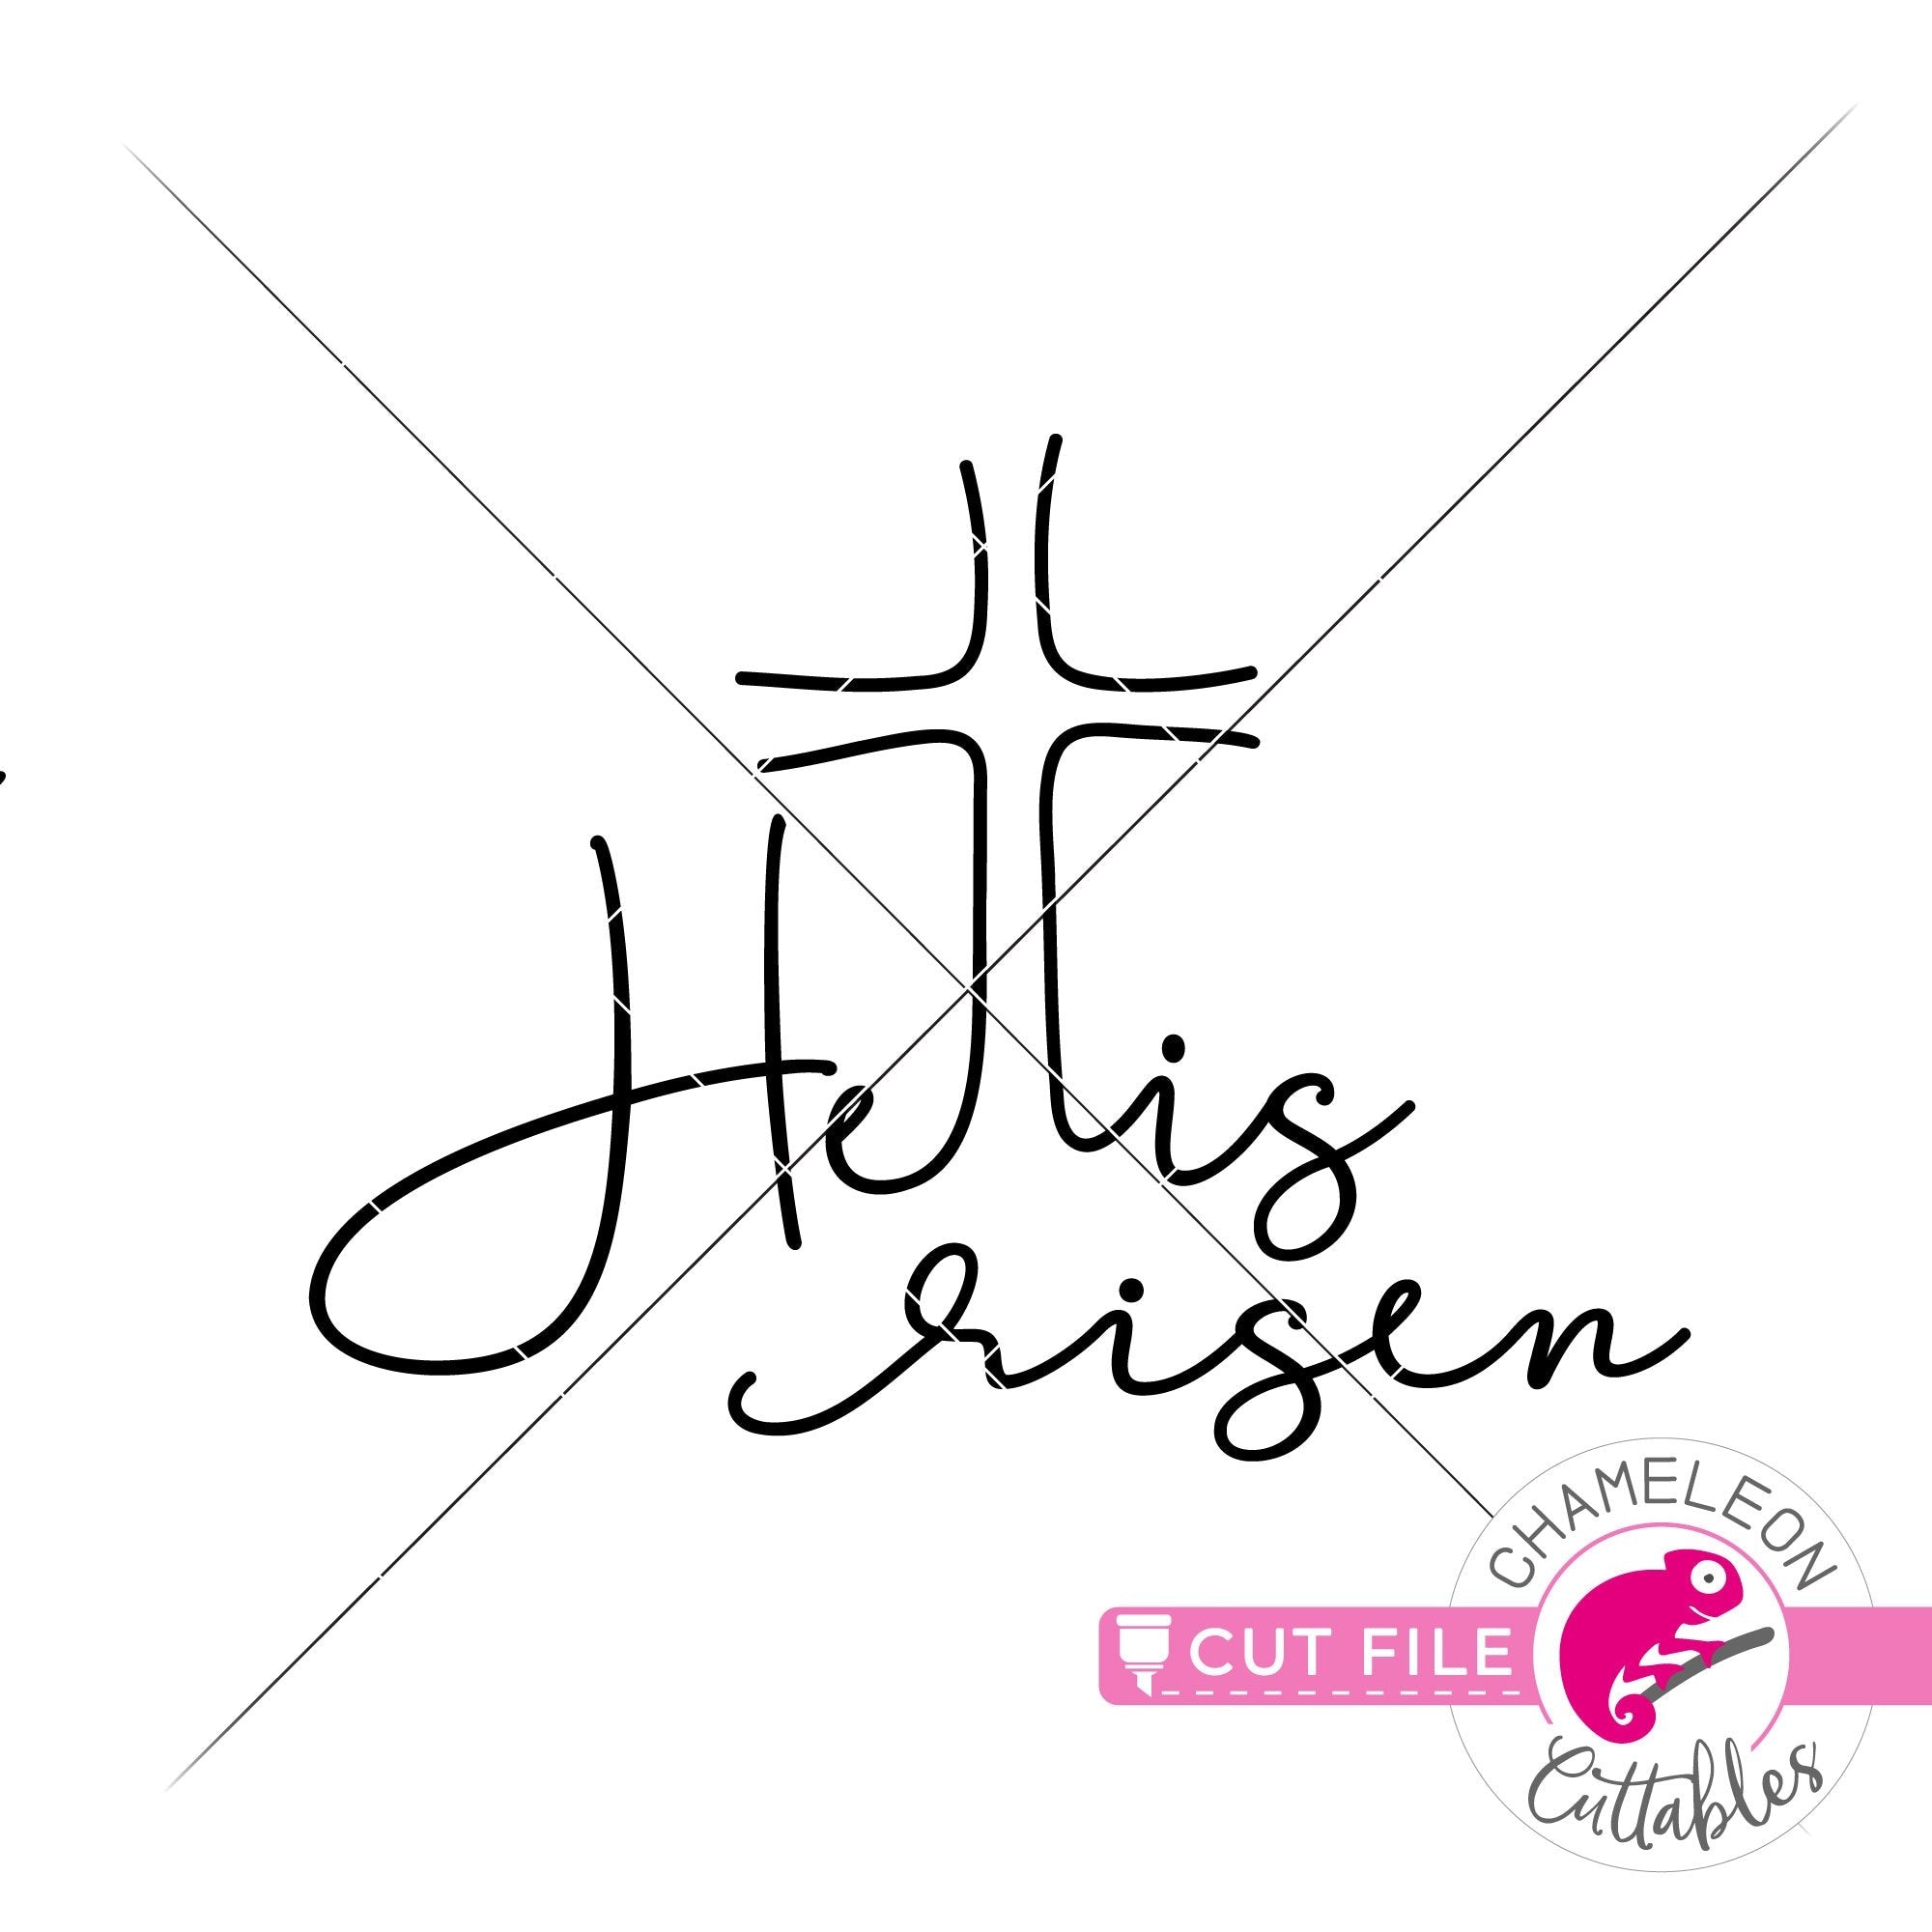 he is risen black and white clipart